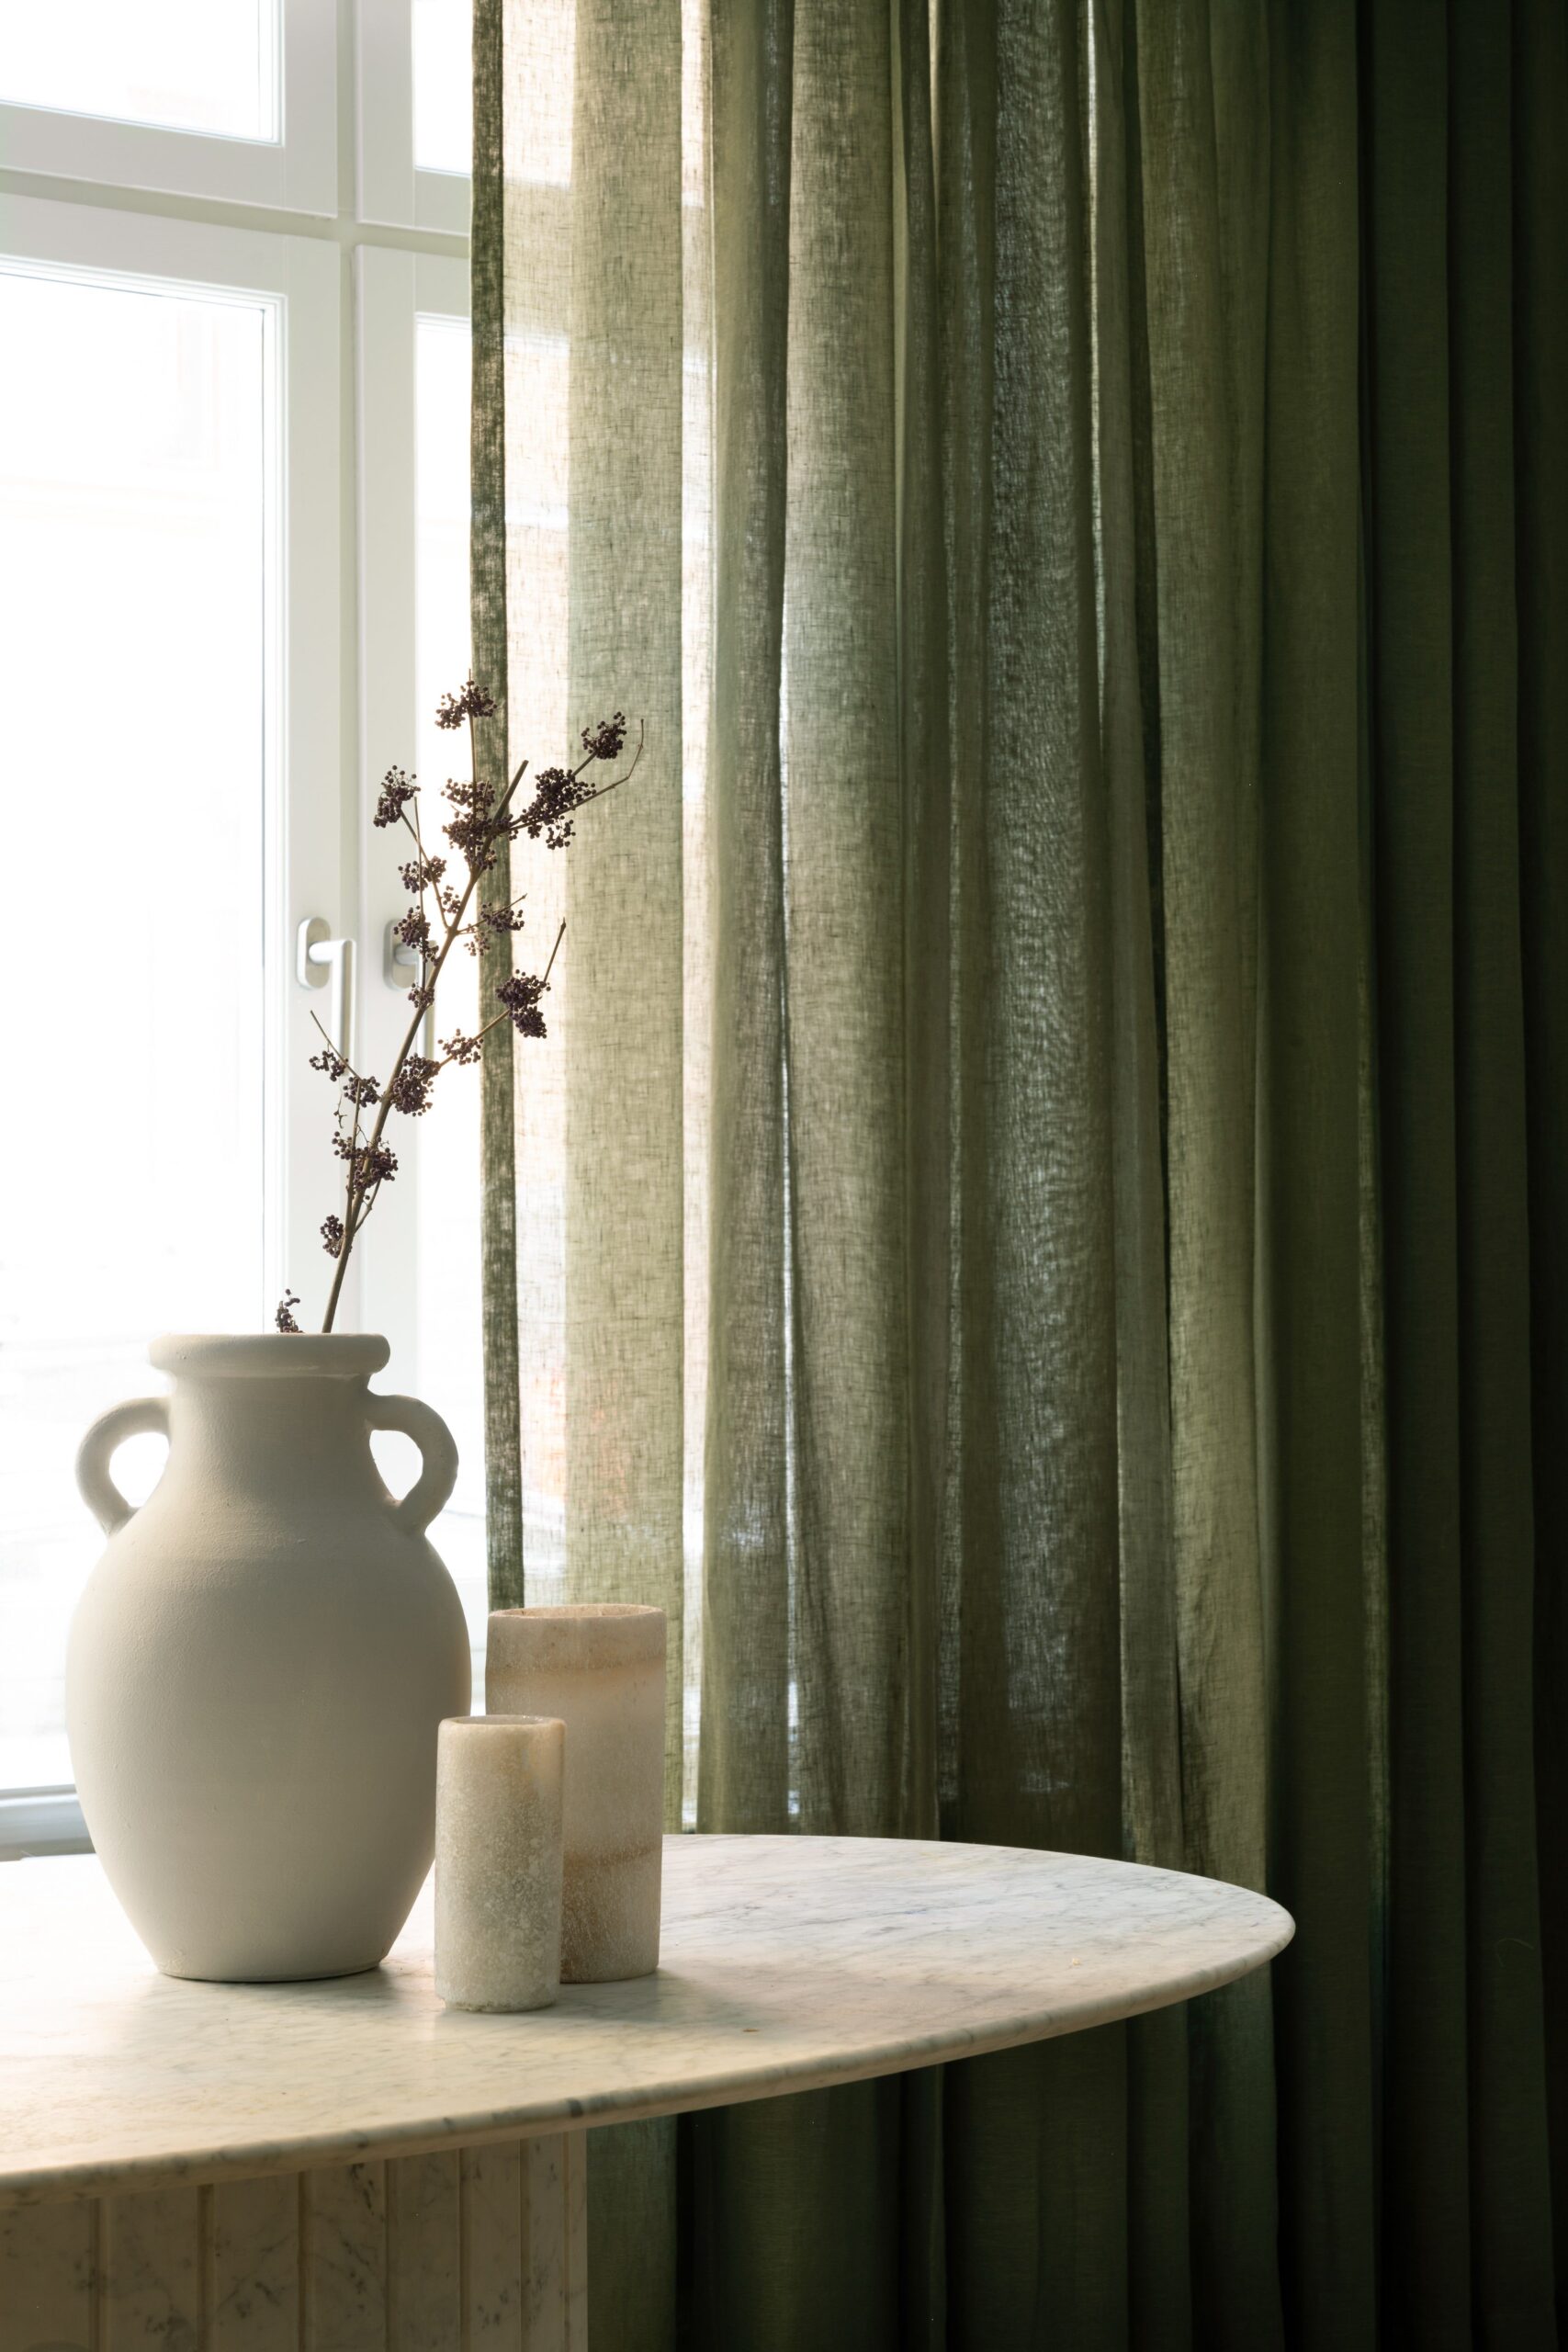 Curtain Accessories: Enhance Your Window Treatments with Stylish Accents